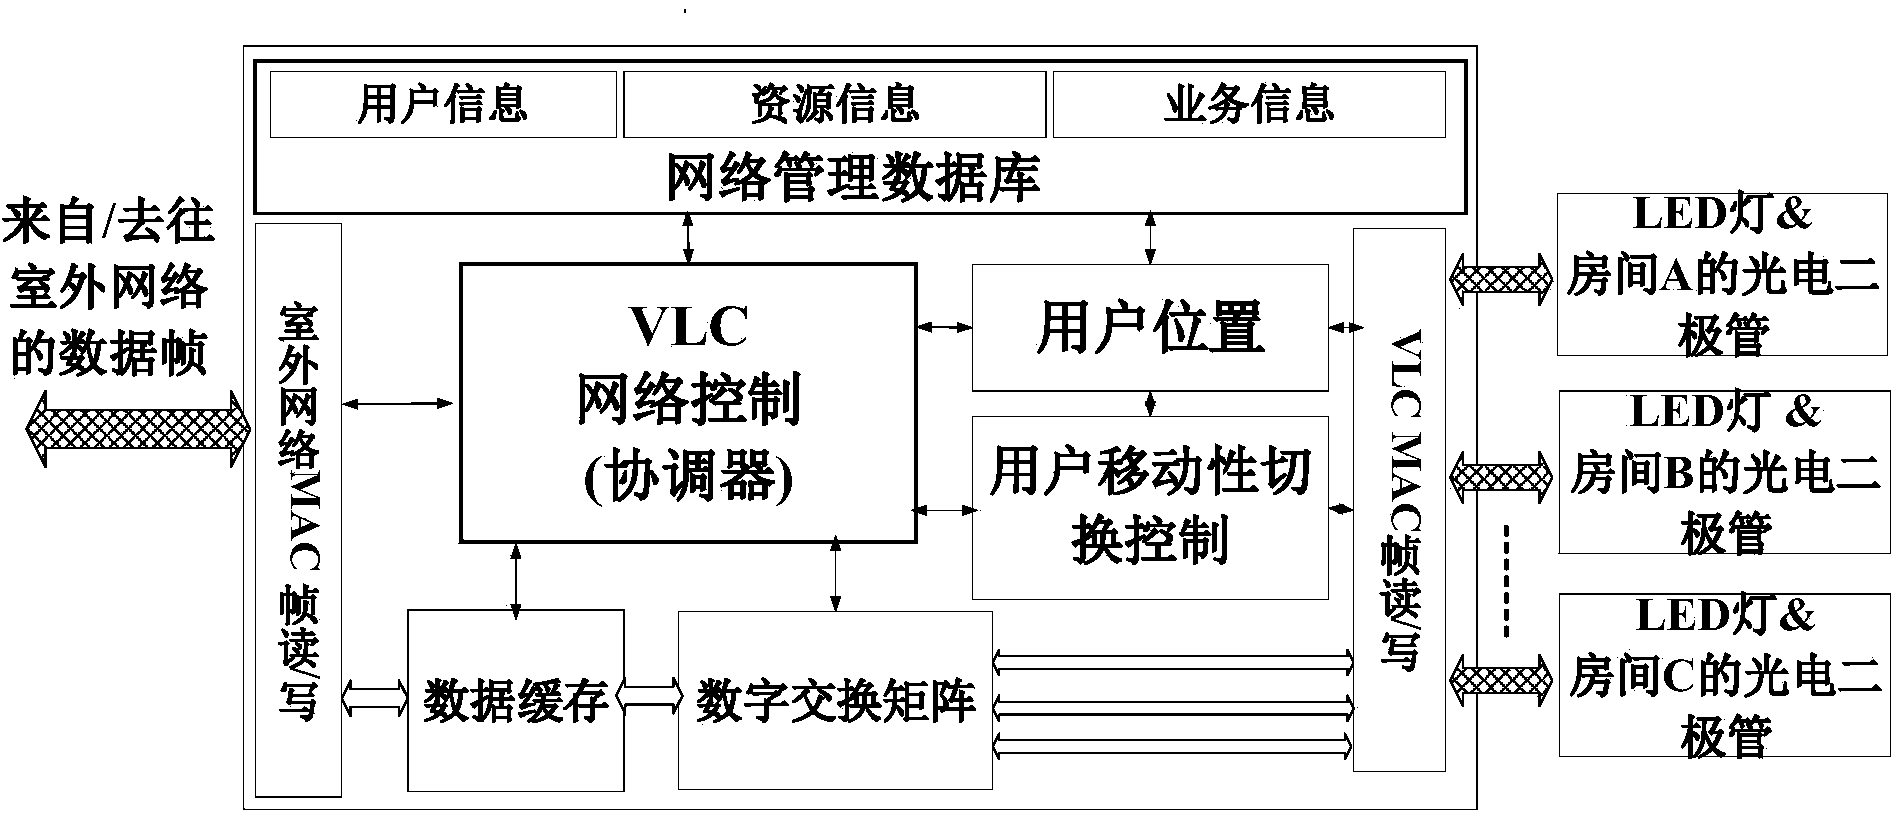 Indoor visible light communication (VLC) hybrid networking scheme based on room division multiplexing (RDM) and implementation method for switching of indoor VLC hybrid networking scheme